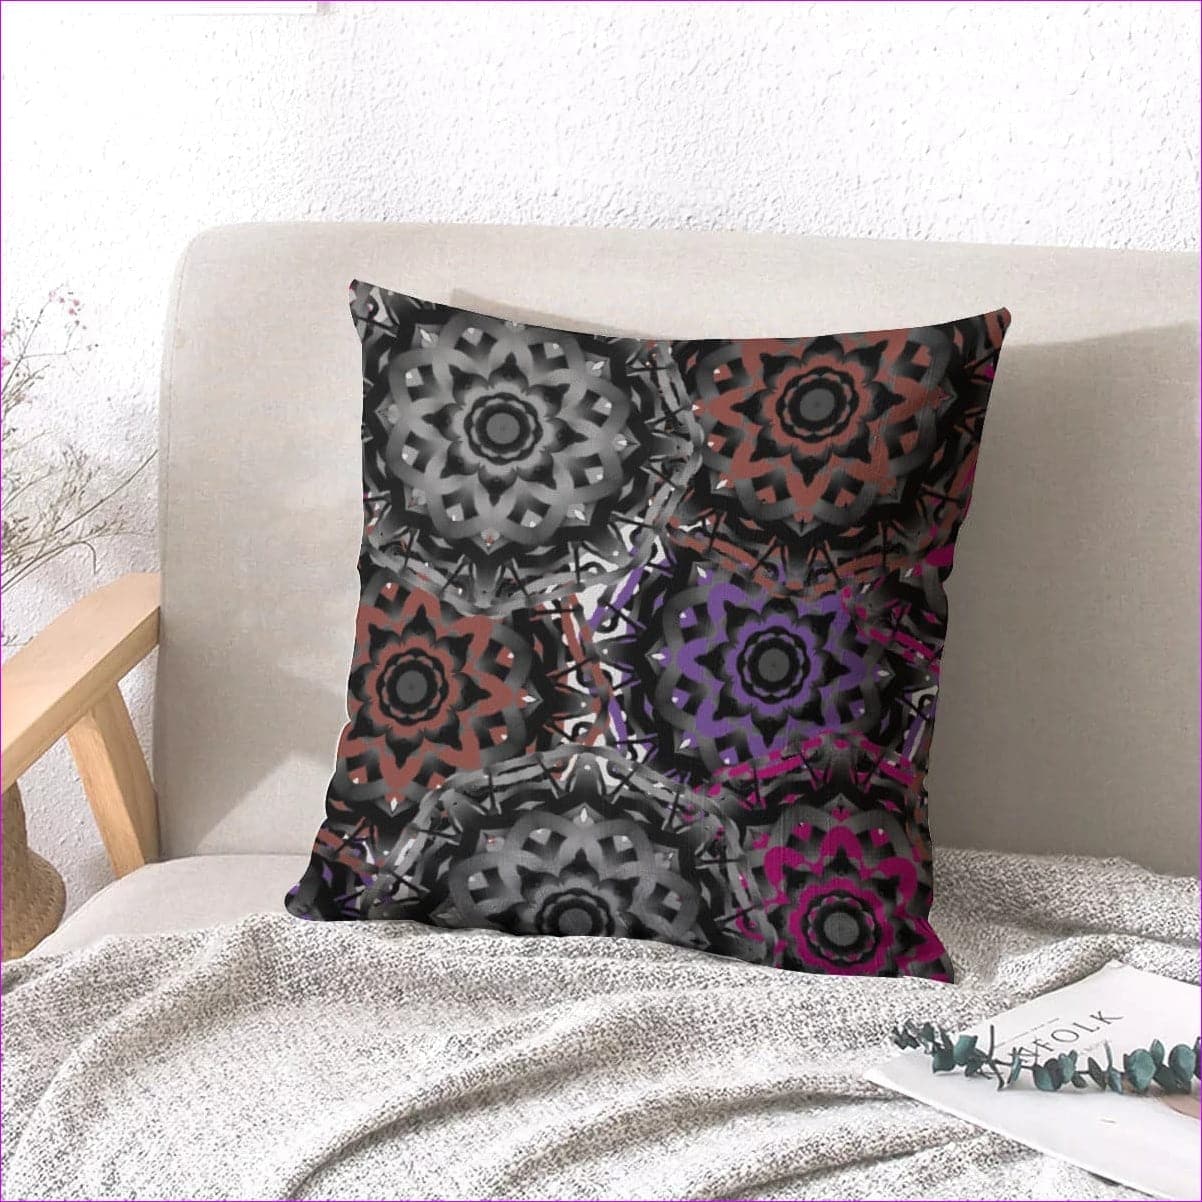 Black Mandala Graffiti Couch pillow with pillow Inserts | linen type fabric Ma - throw pillow at TFC&H Co.